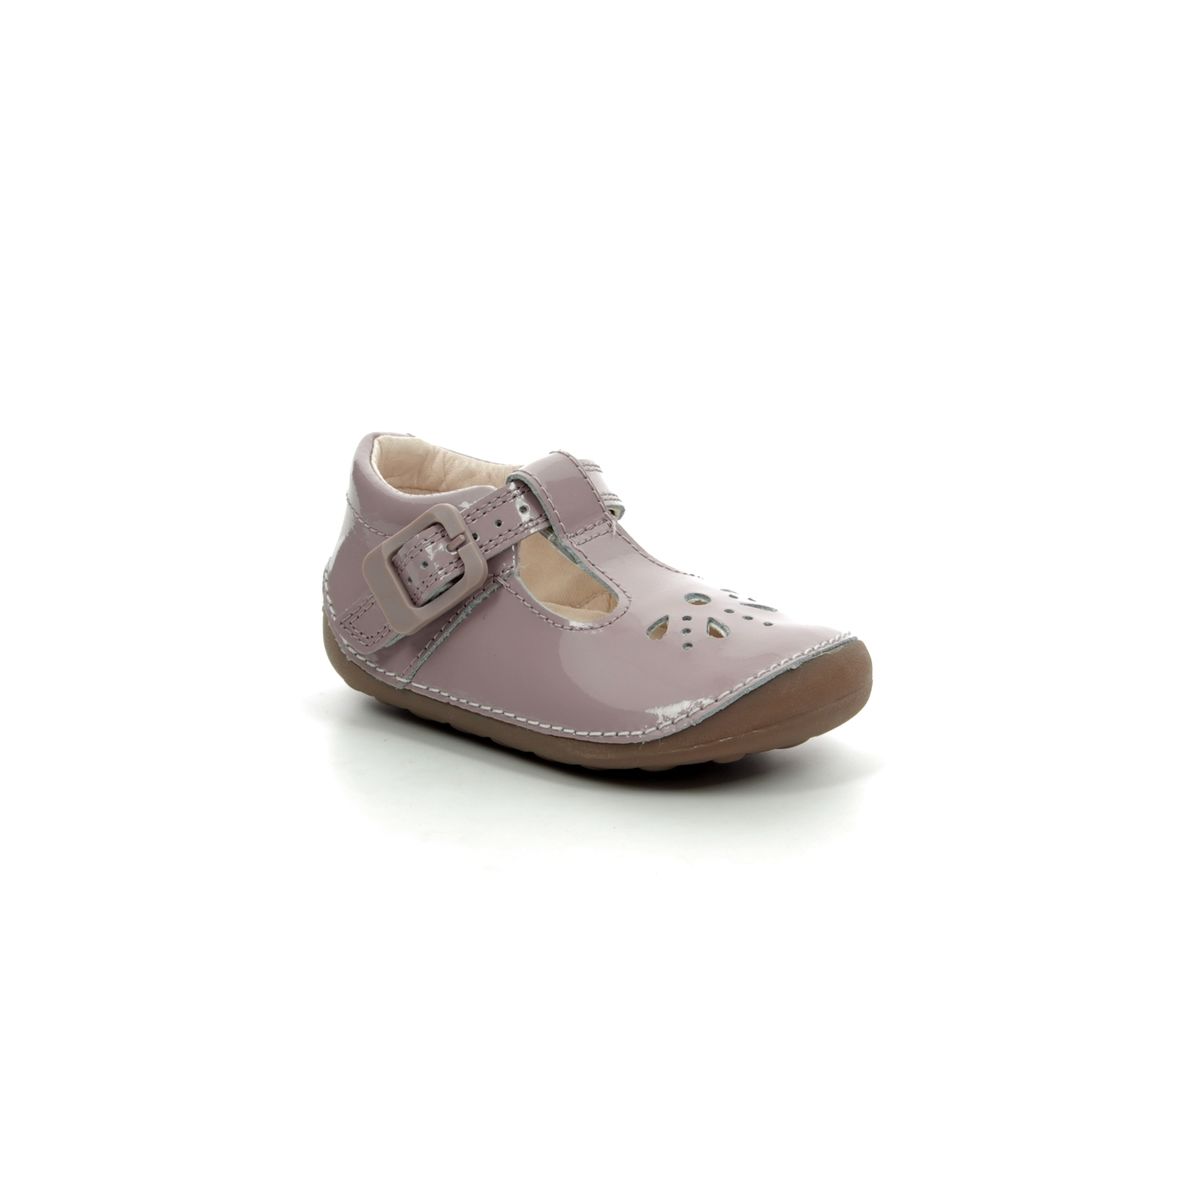 clarks size 4 baby shoes